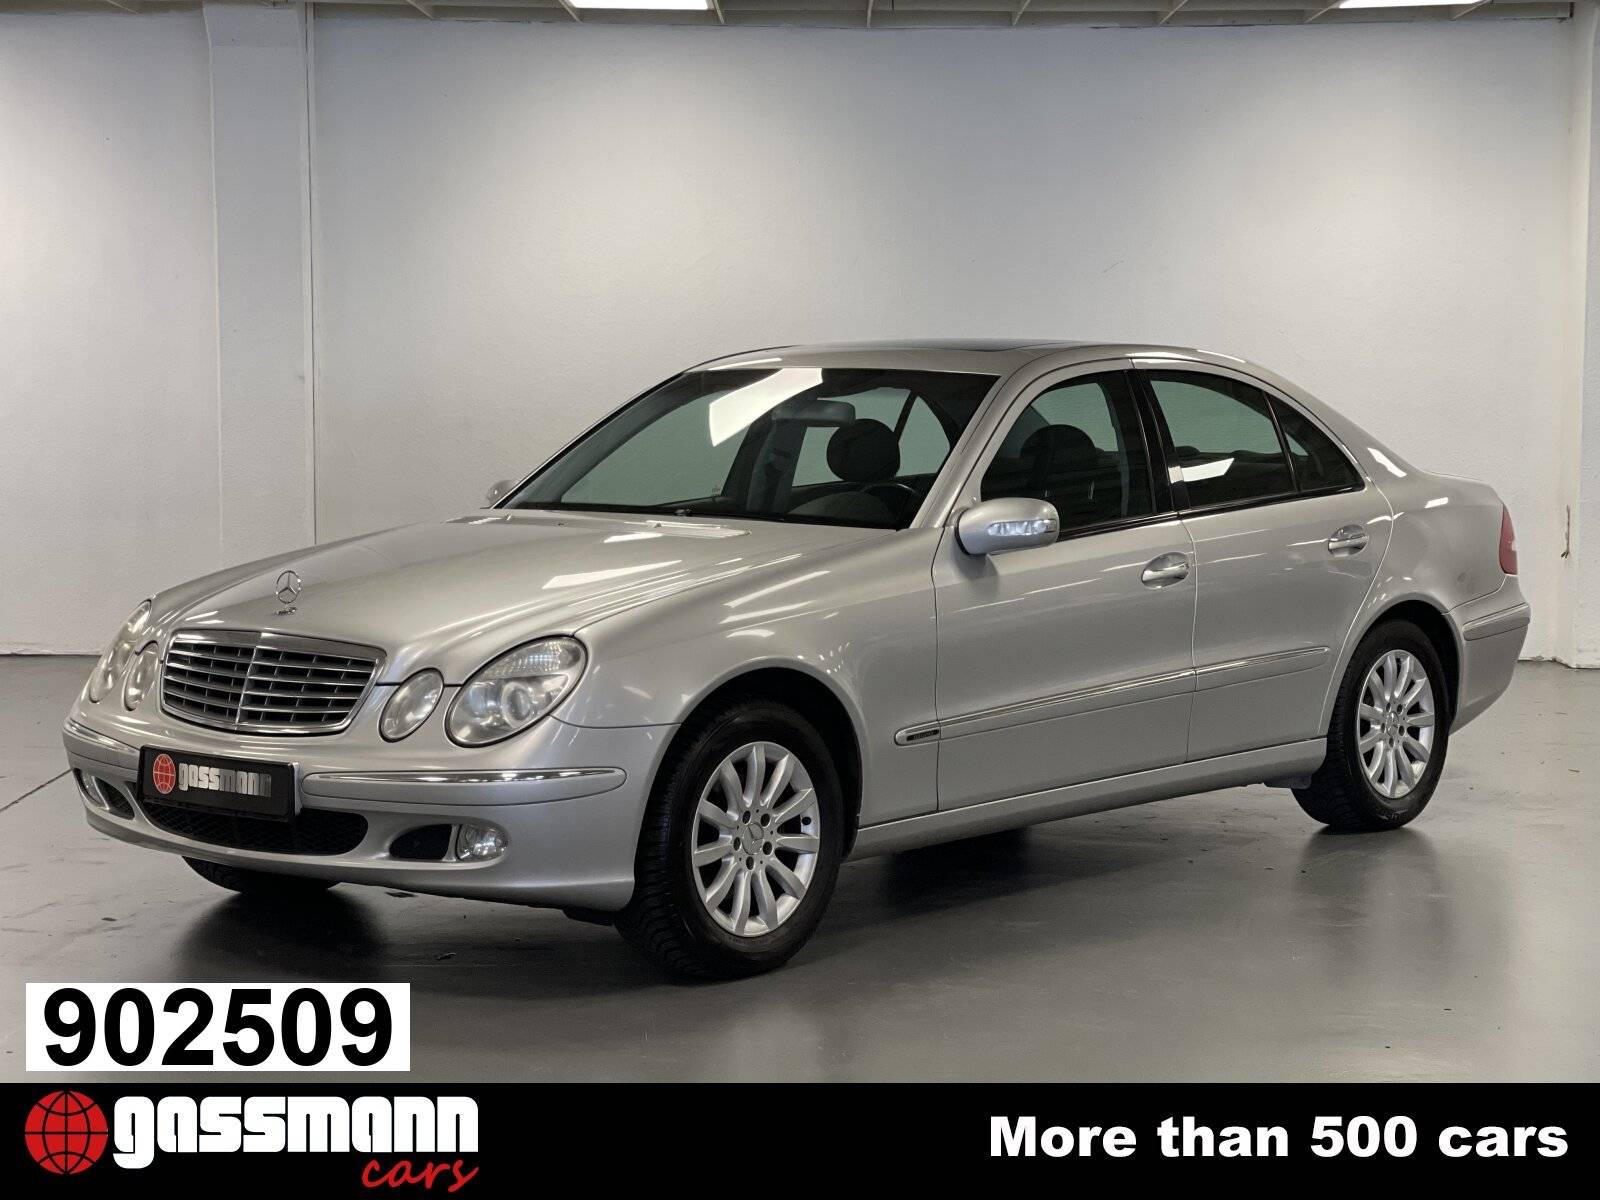 Mercedes-Benz E-Class W 211 Classic Cars for Sale - Classic Trader